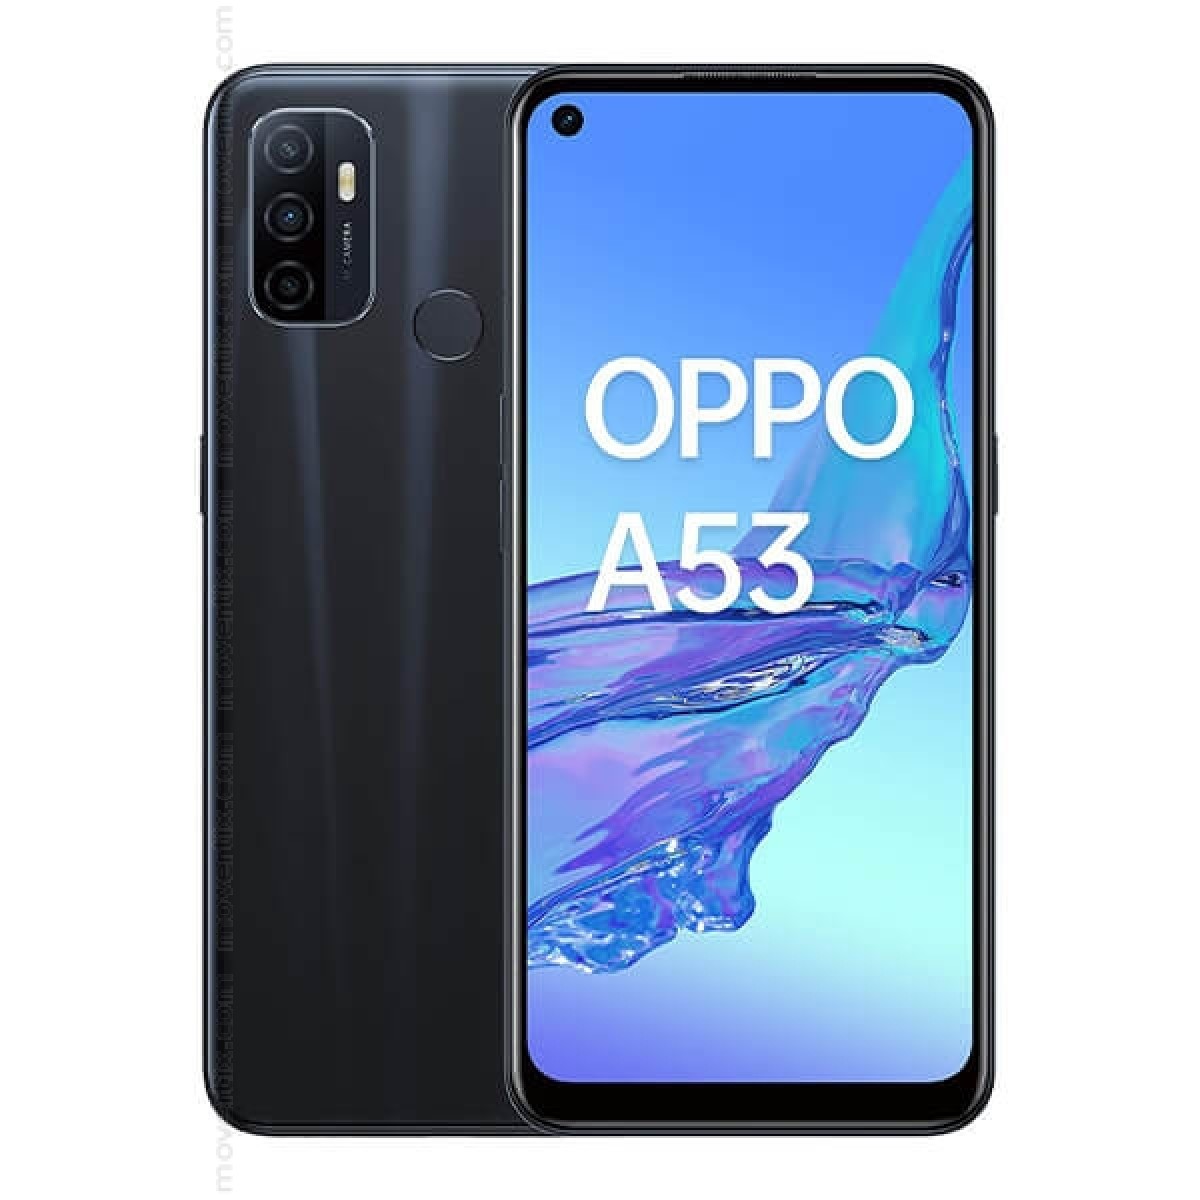 Oppo a53 Mobile Phones